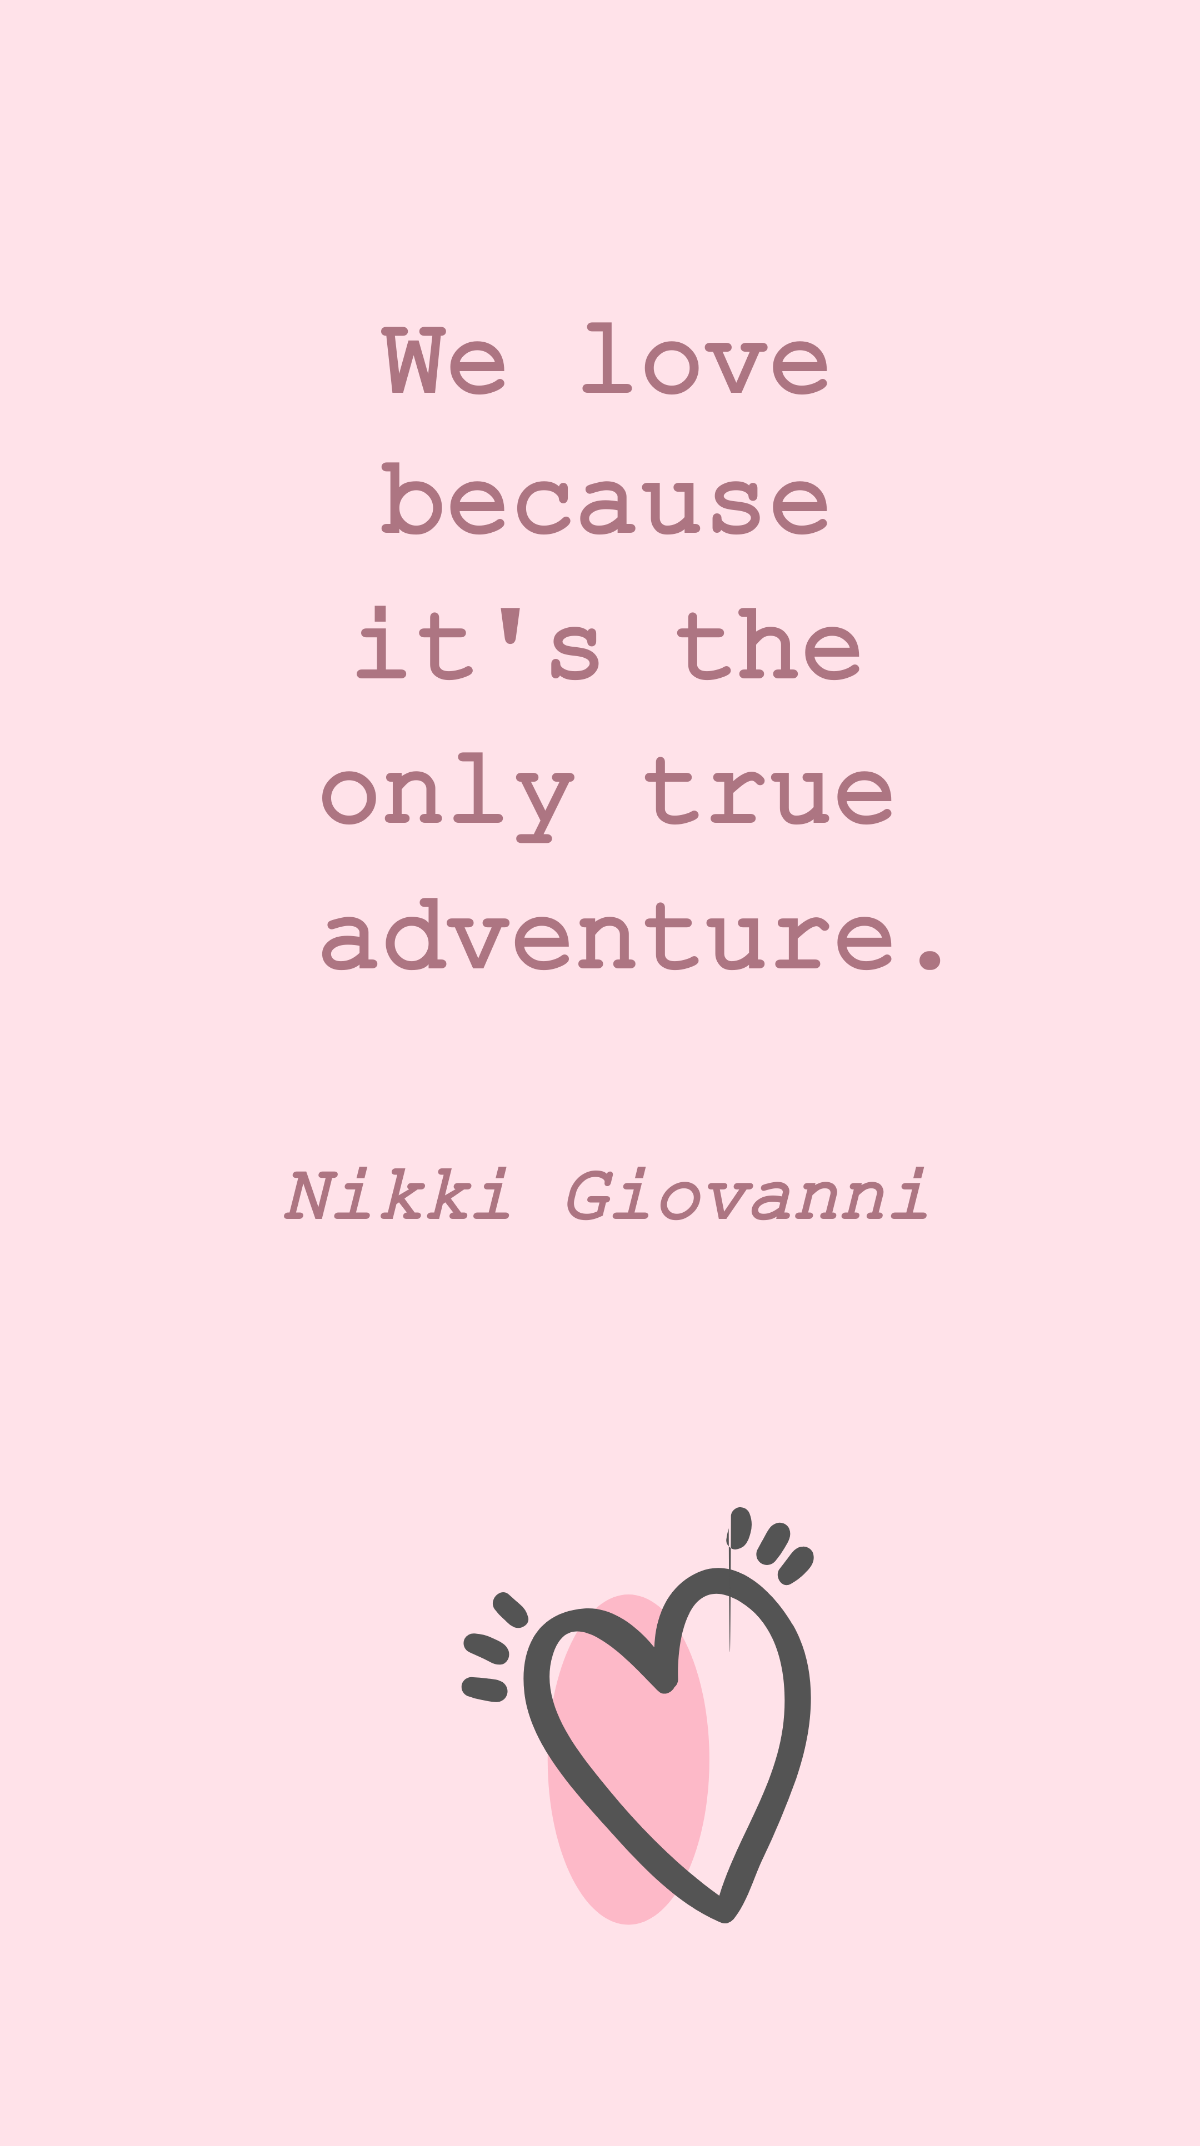 Nikki Giovanni - We love because it's the only true adventure. Template